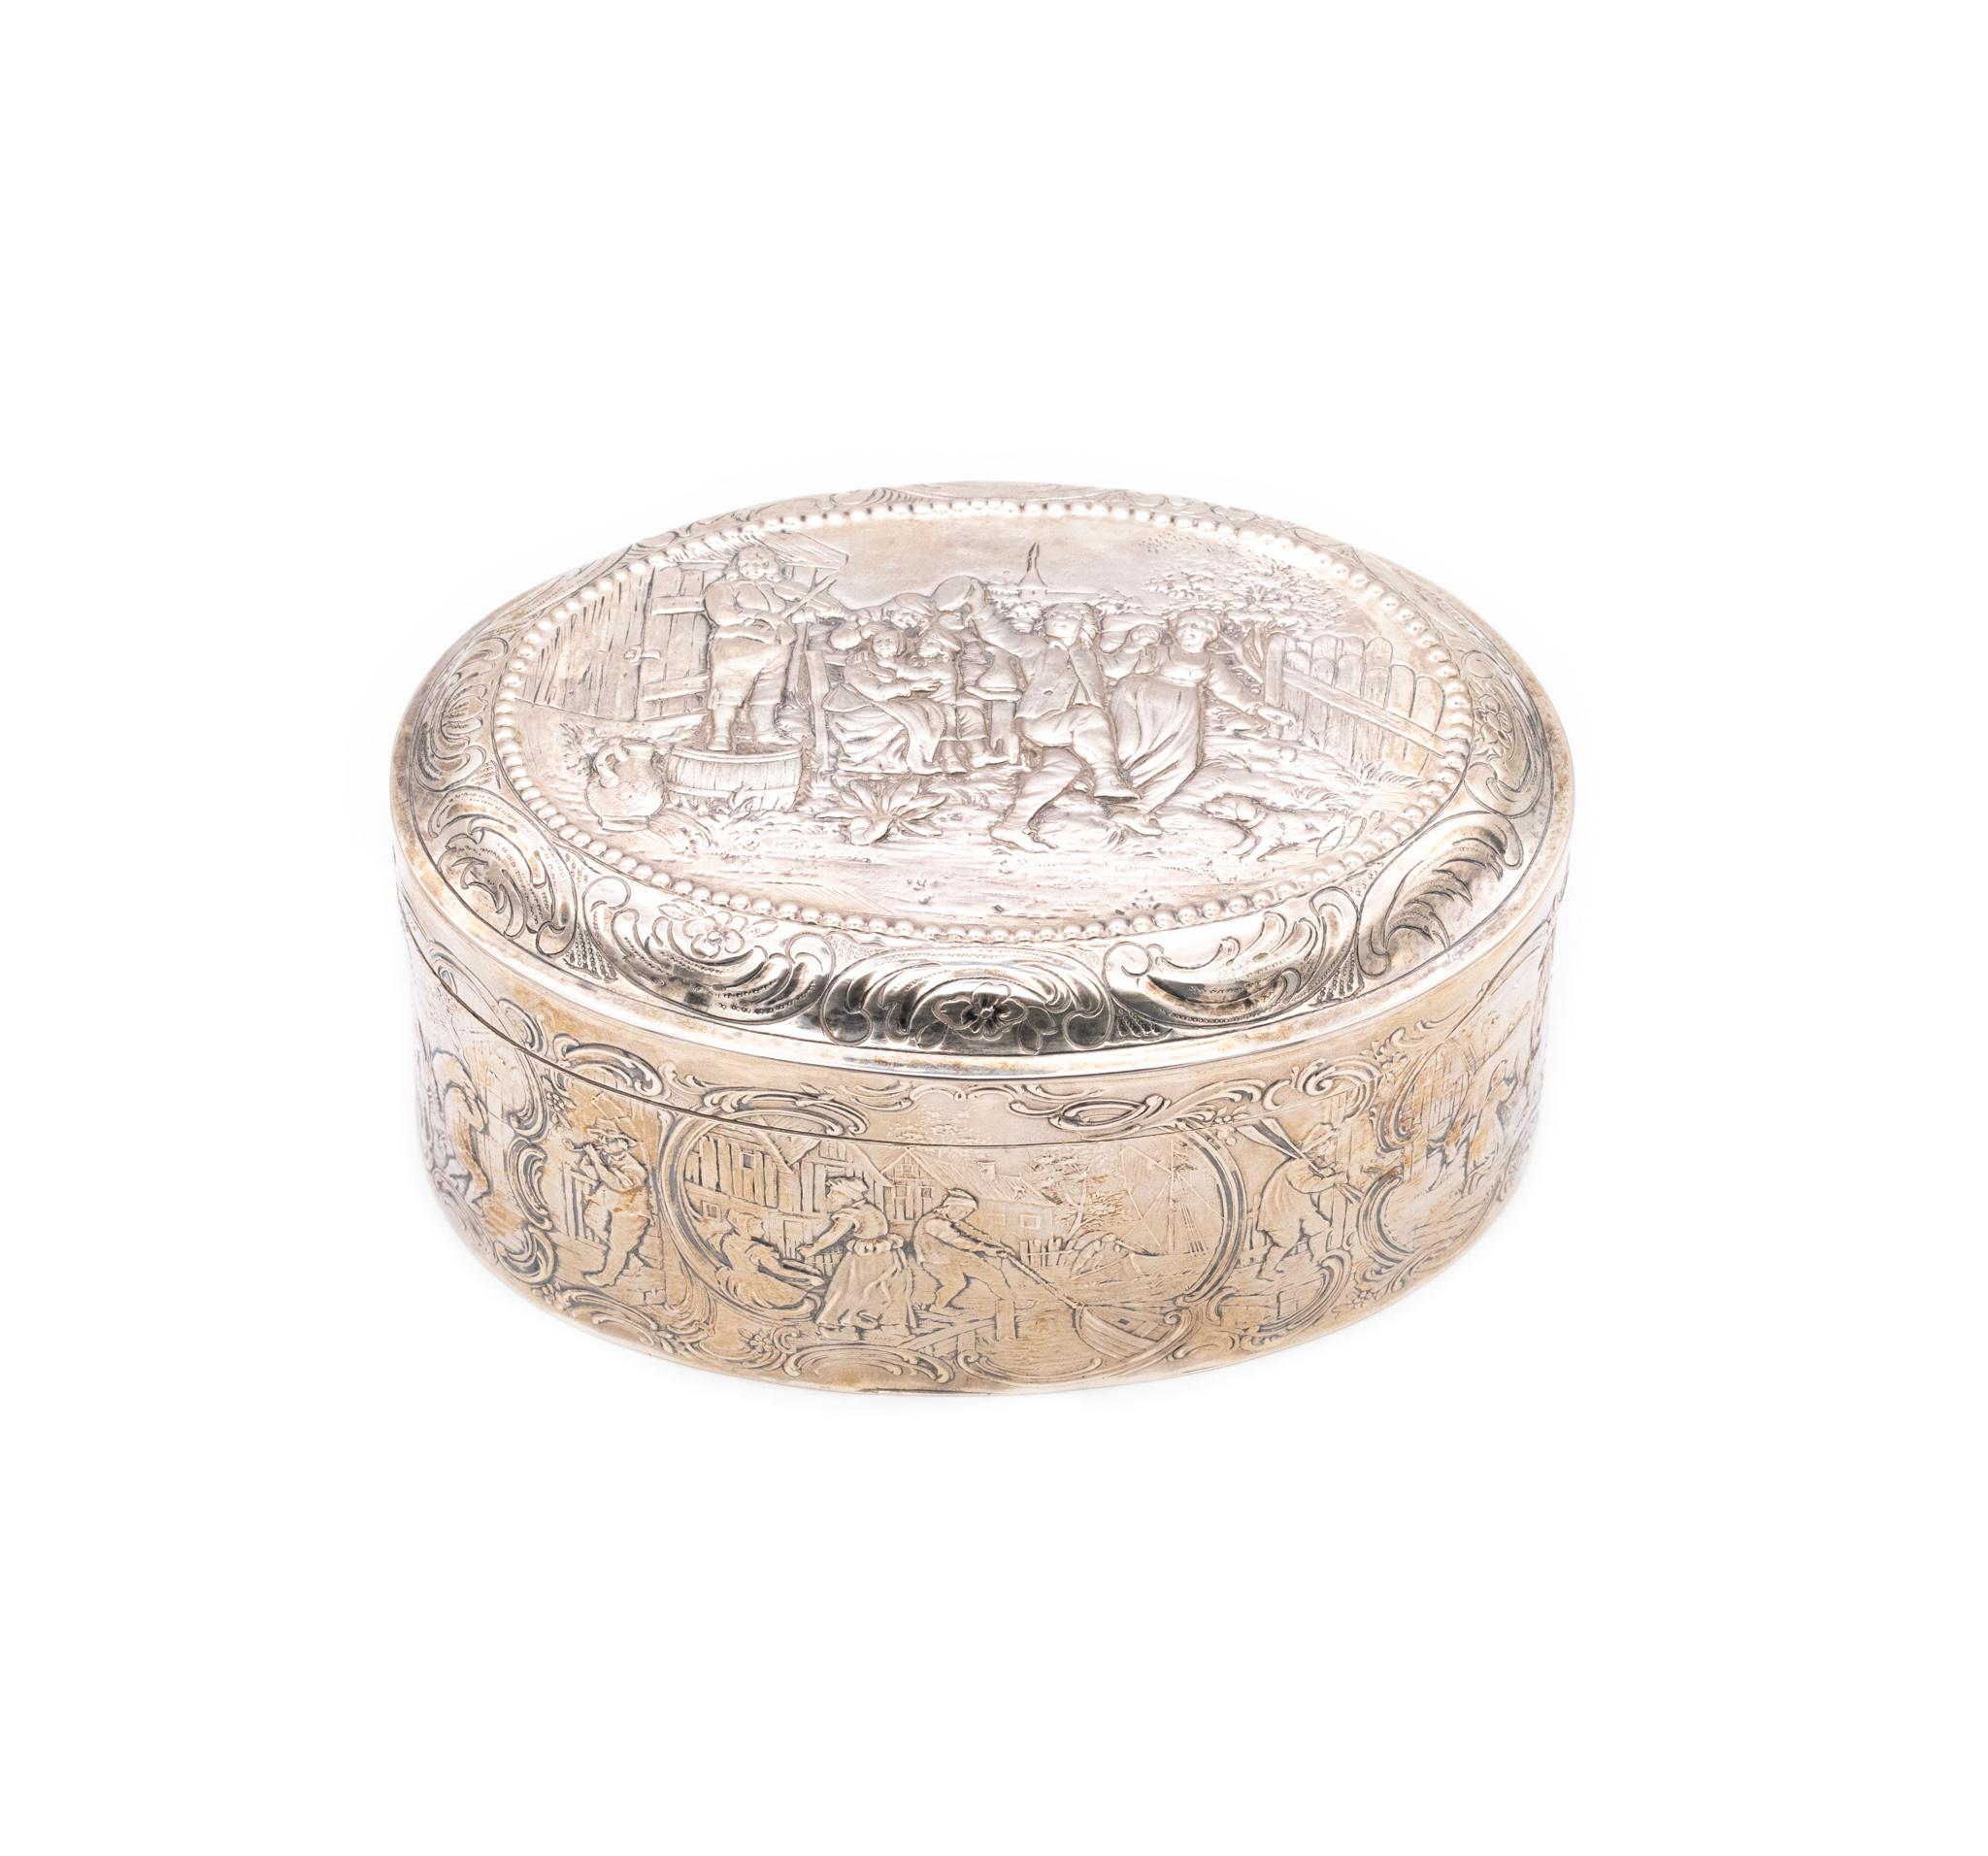 Dutch repousse trinket box in sterling silver.

A highly decorated presentation oval trinket box, made in northern Europe Netherlands, in 1872. Crafted in solid repousse .875/.999 sterling silver, with the complete surface decorated, with